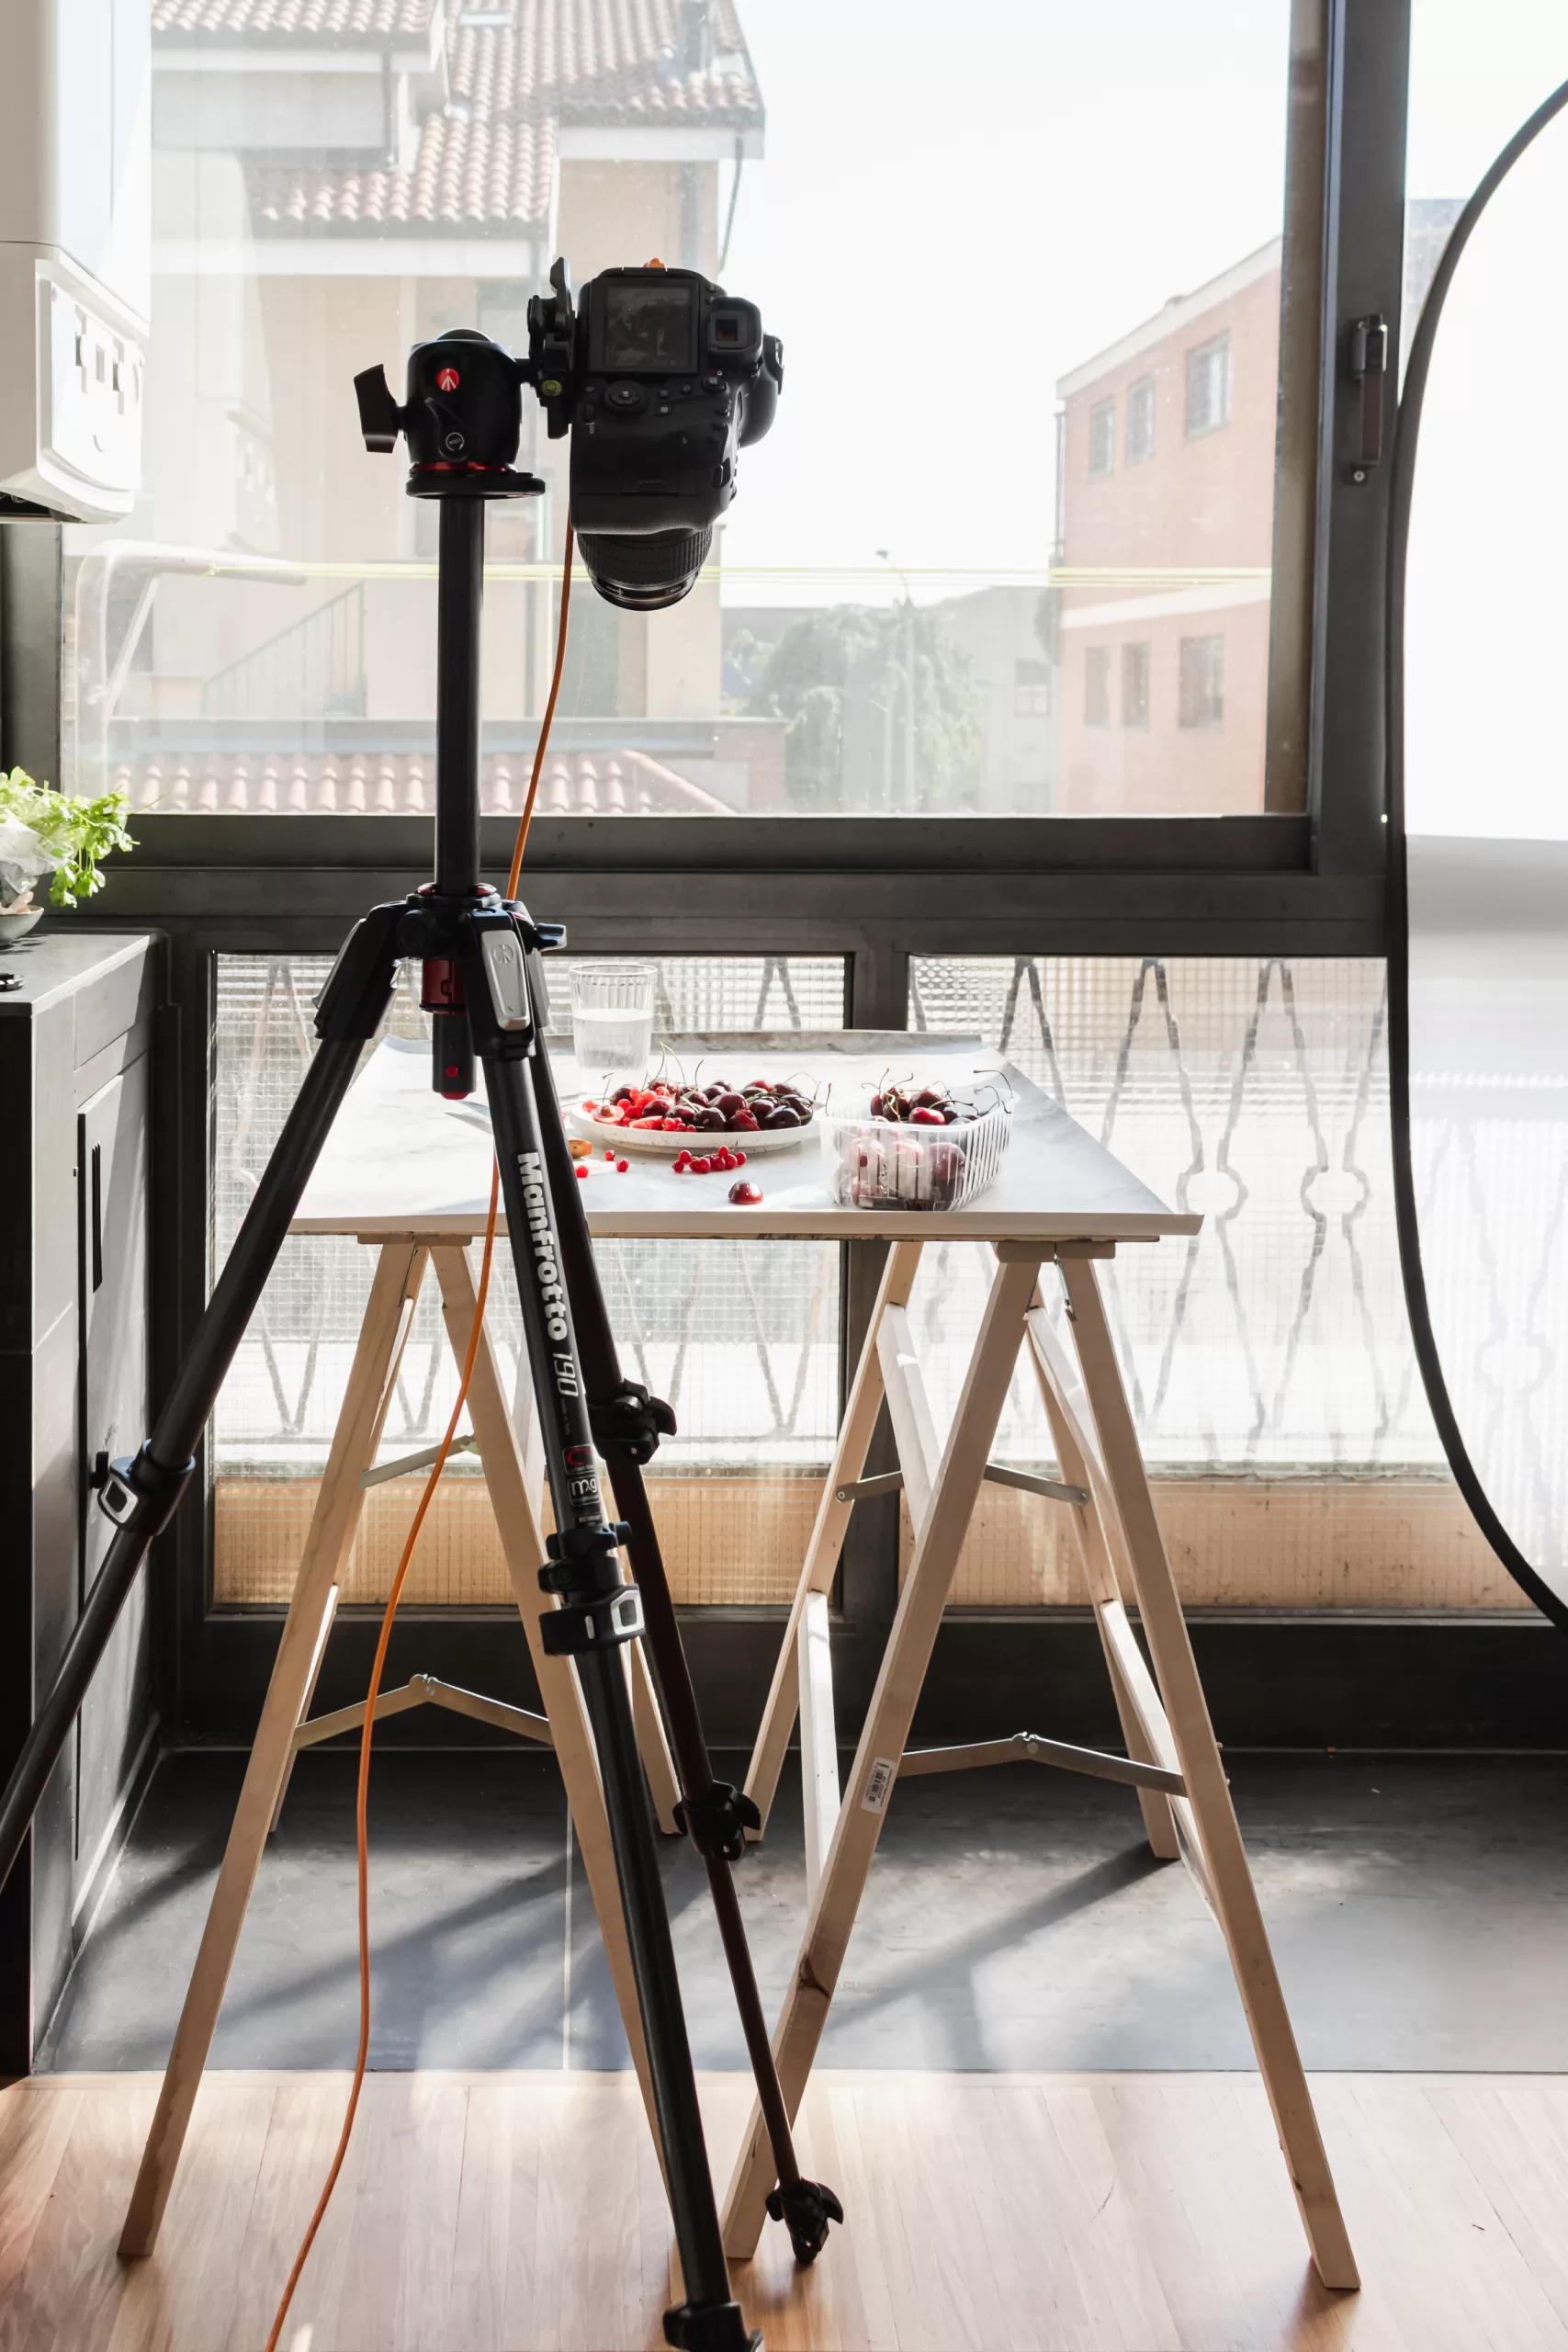 photography equipment -food photographer working with natural light